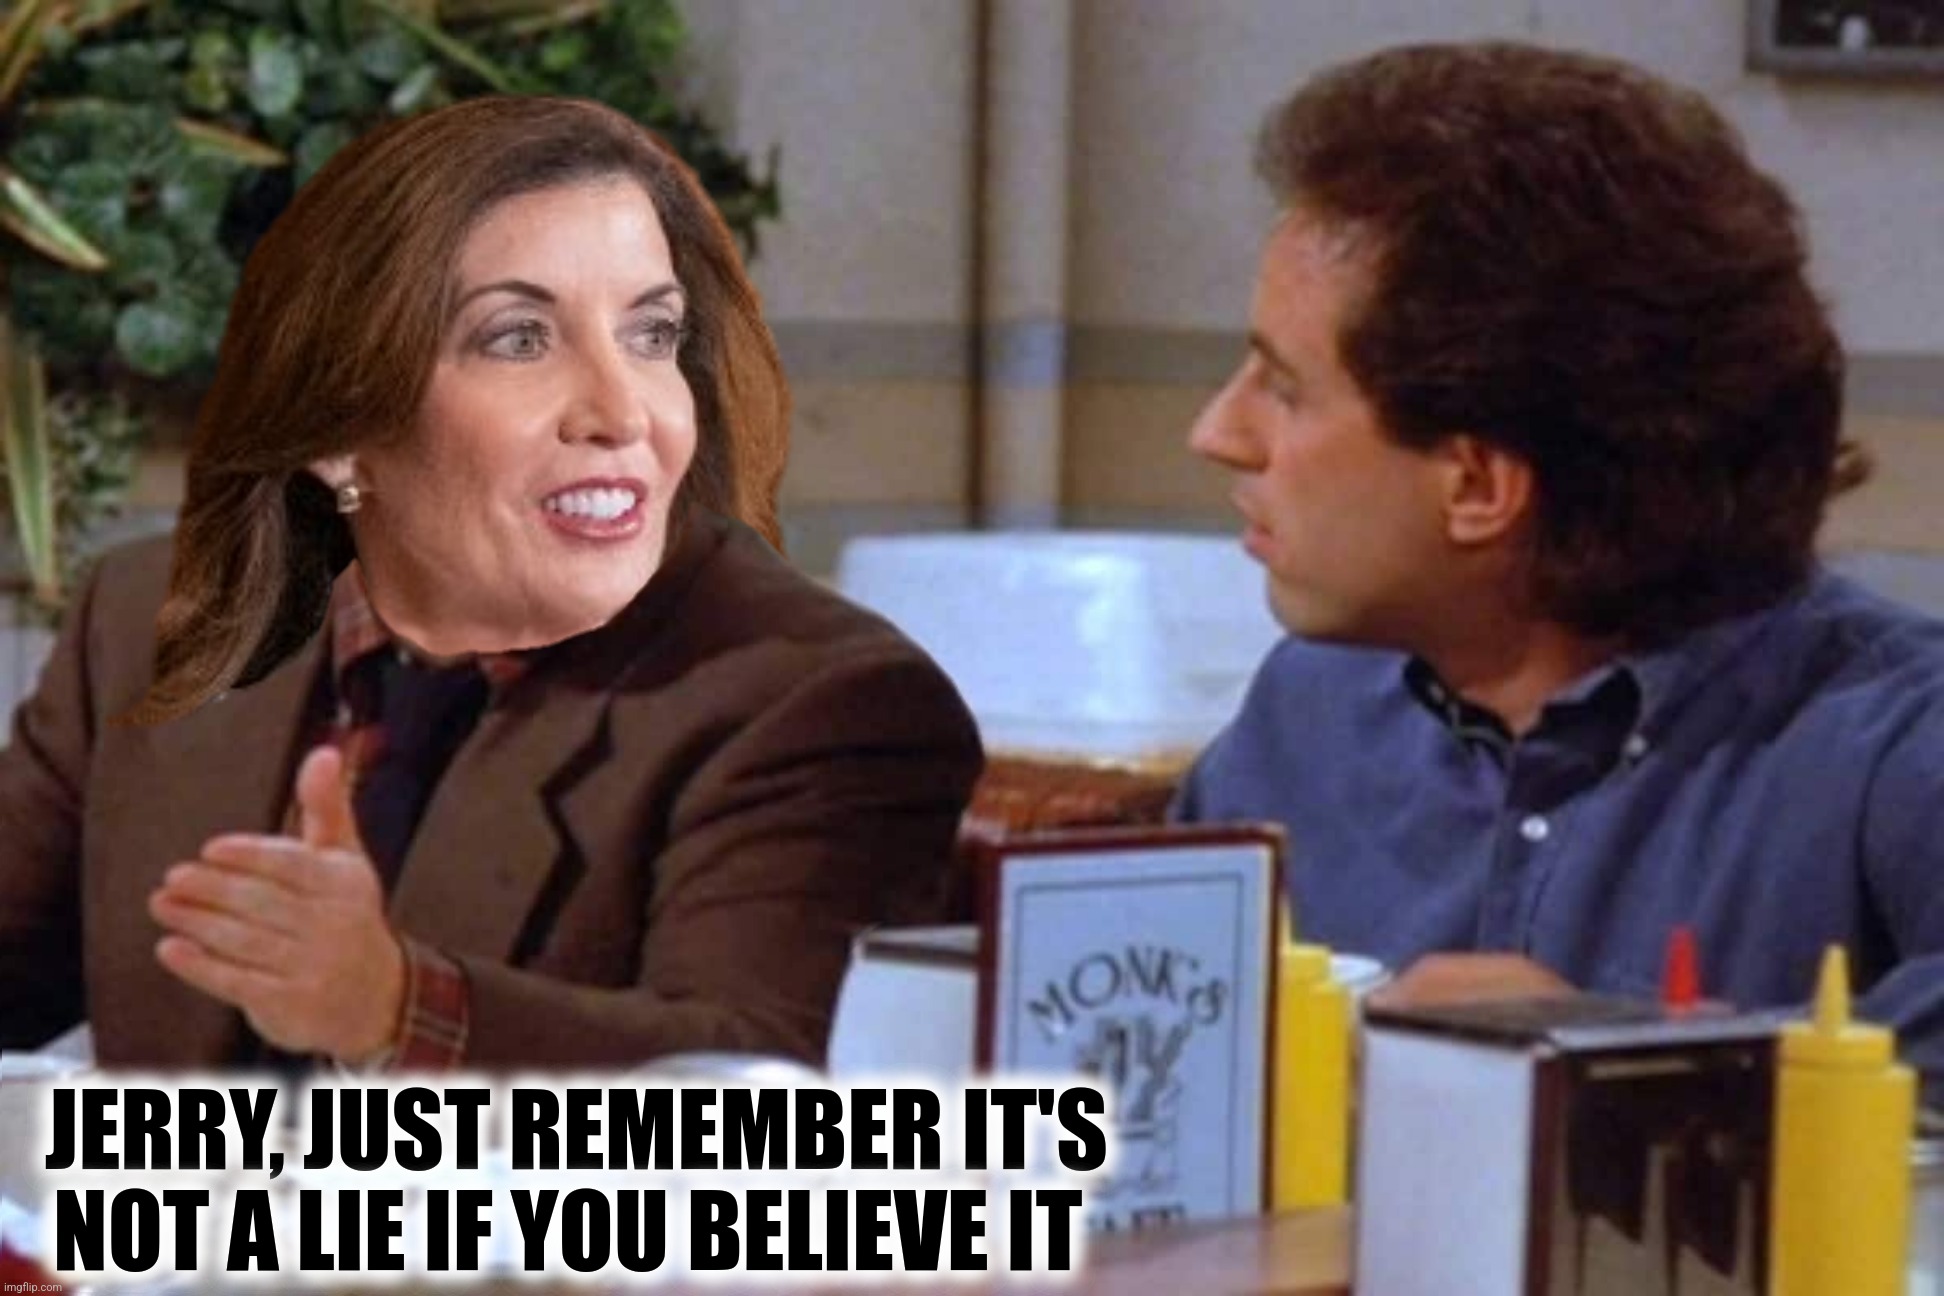 JERRY, JUST REMEMBER IT'S NOT A LIE IF YOU BELIEVE IT | made w/ Imgflip meme maker